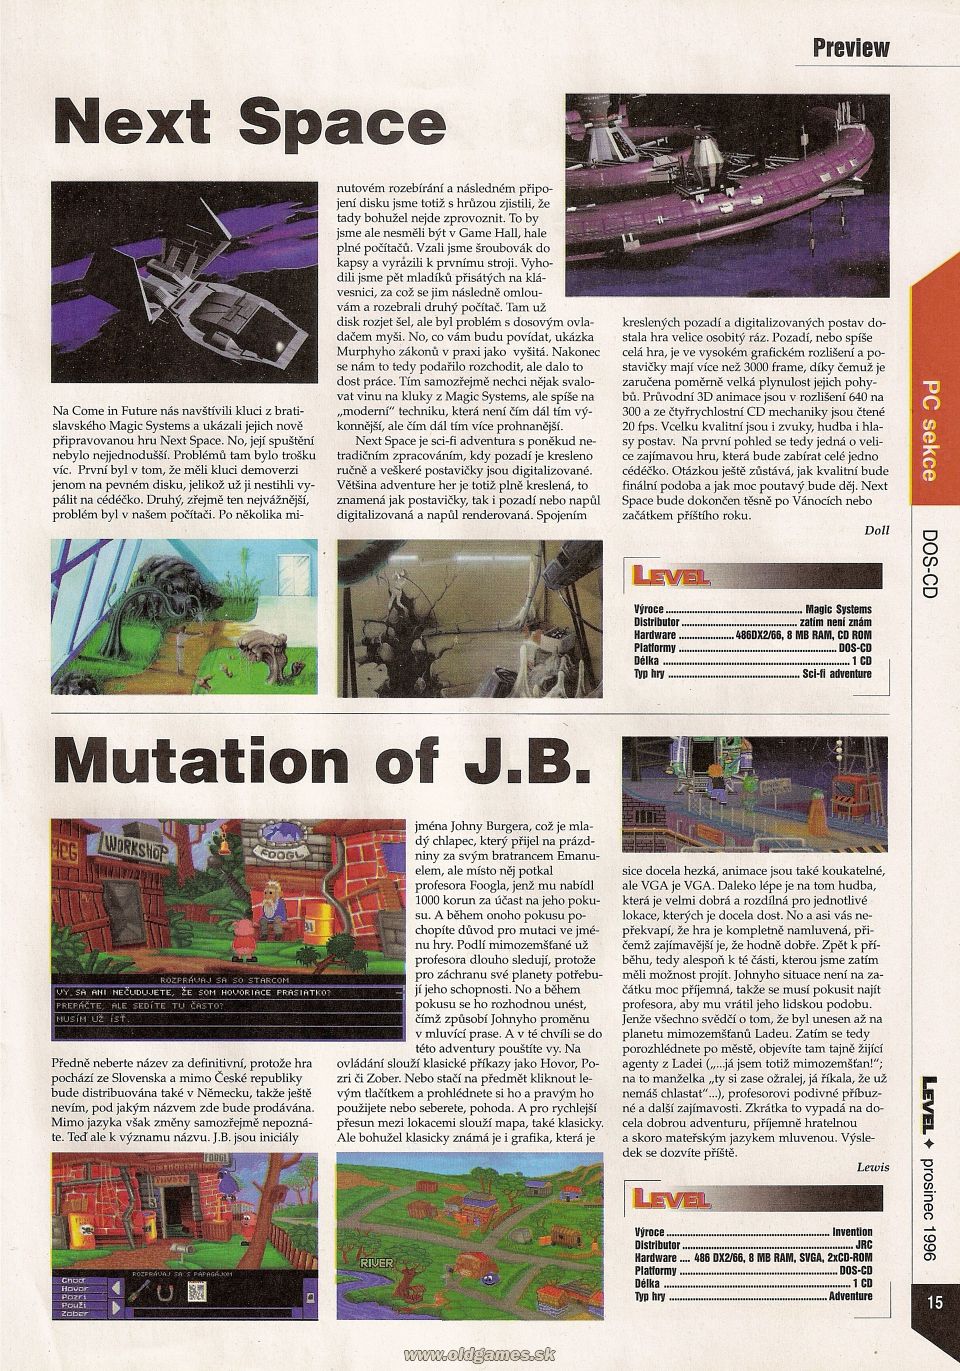 Preview: Next Space, Mutation of J.B.